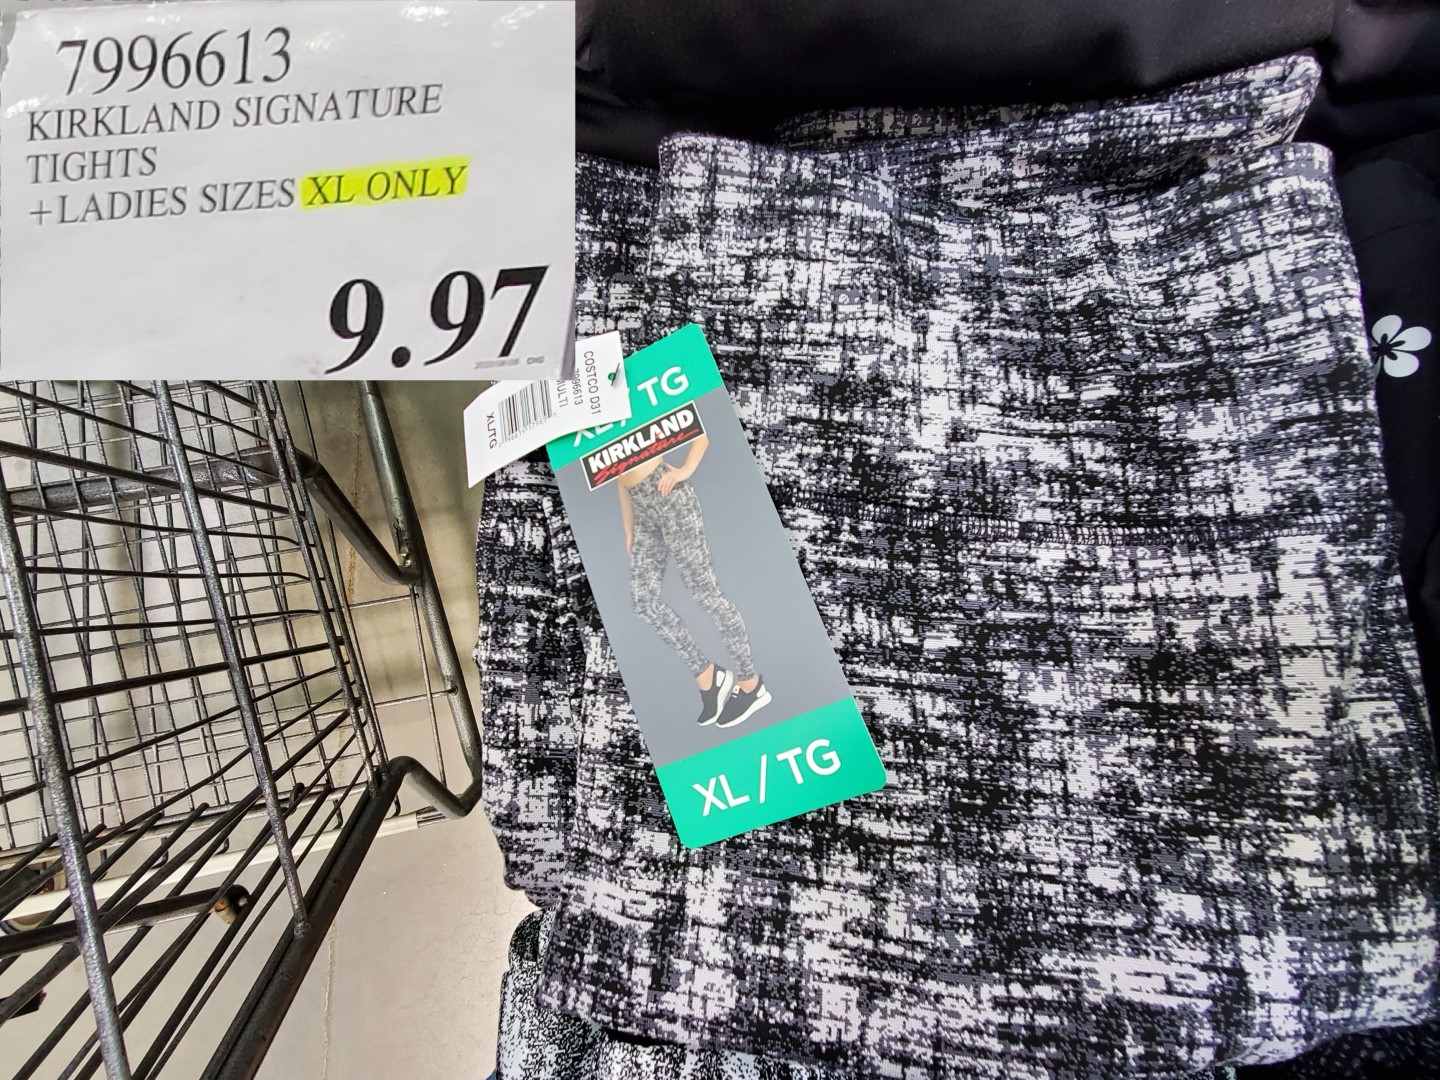 7996613 KIRKLAND SIGNATURE TIGHTS LADIES SIZES XL ONLY 9 97 - Costco East  Fan Blog